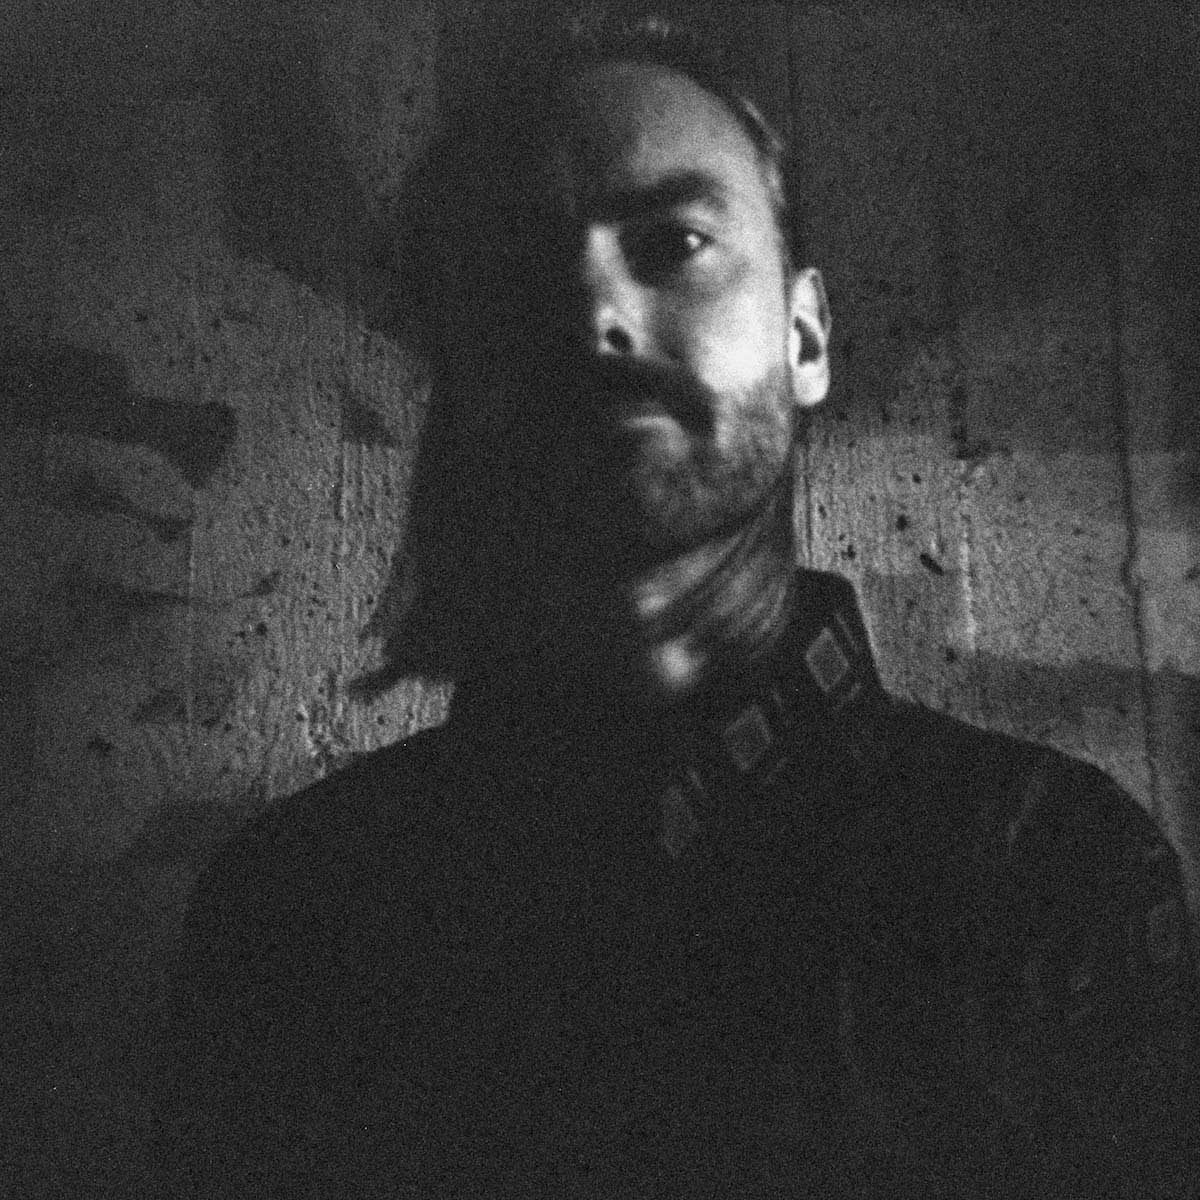 Slightly blurred and dark black and white portrait photo of Karl Vento, with half of his face in shadow. The white man with a black, short full beard stands in front of a textured wall and wears a dark shirt.